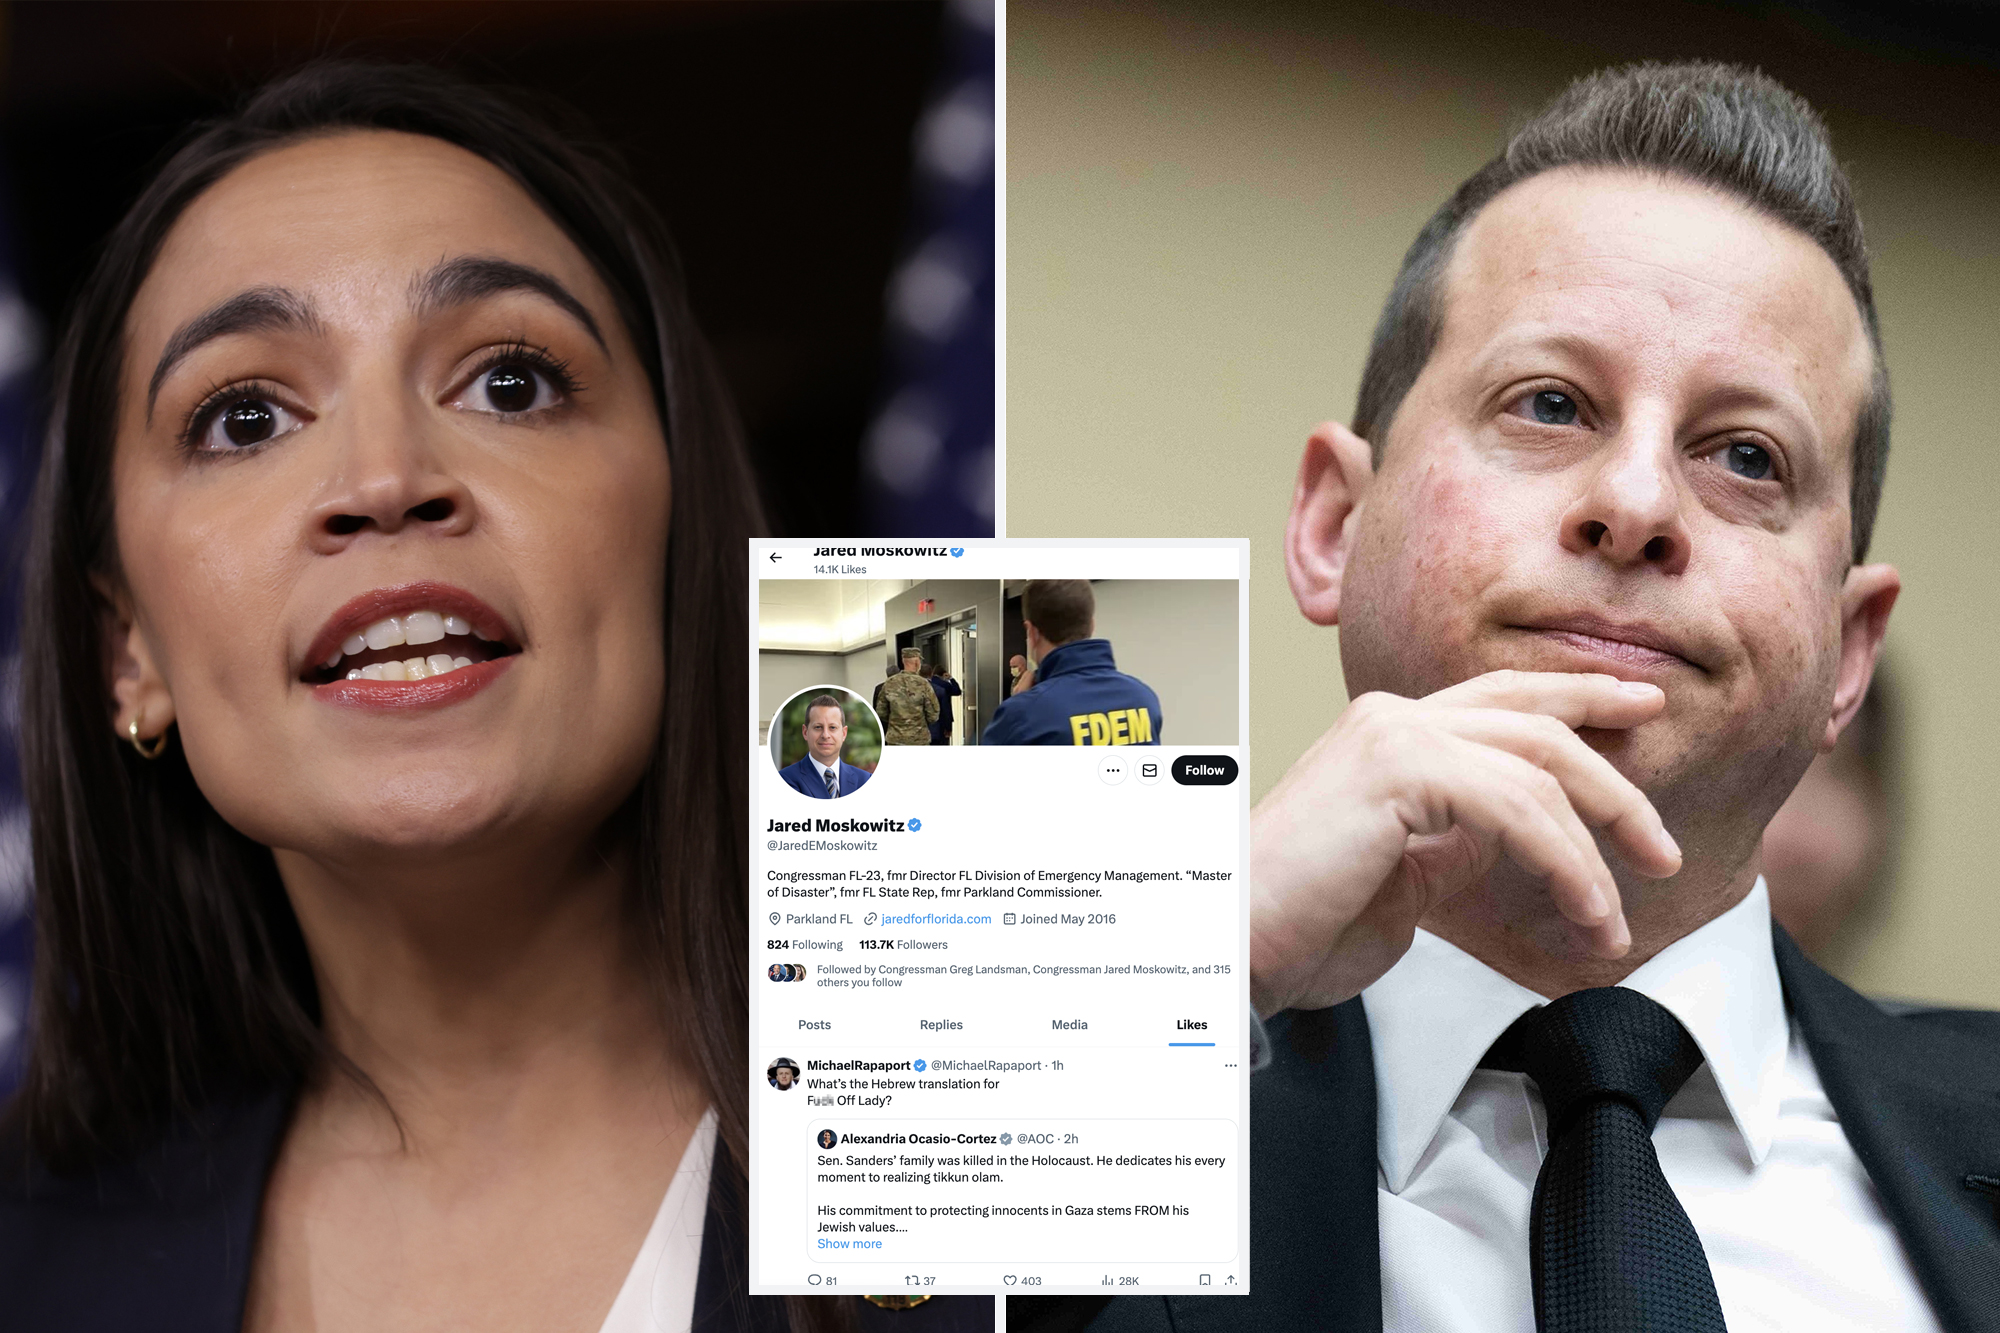 Jared Moskowitz liked a social media post effectively telling AOC to "F— off."